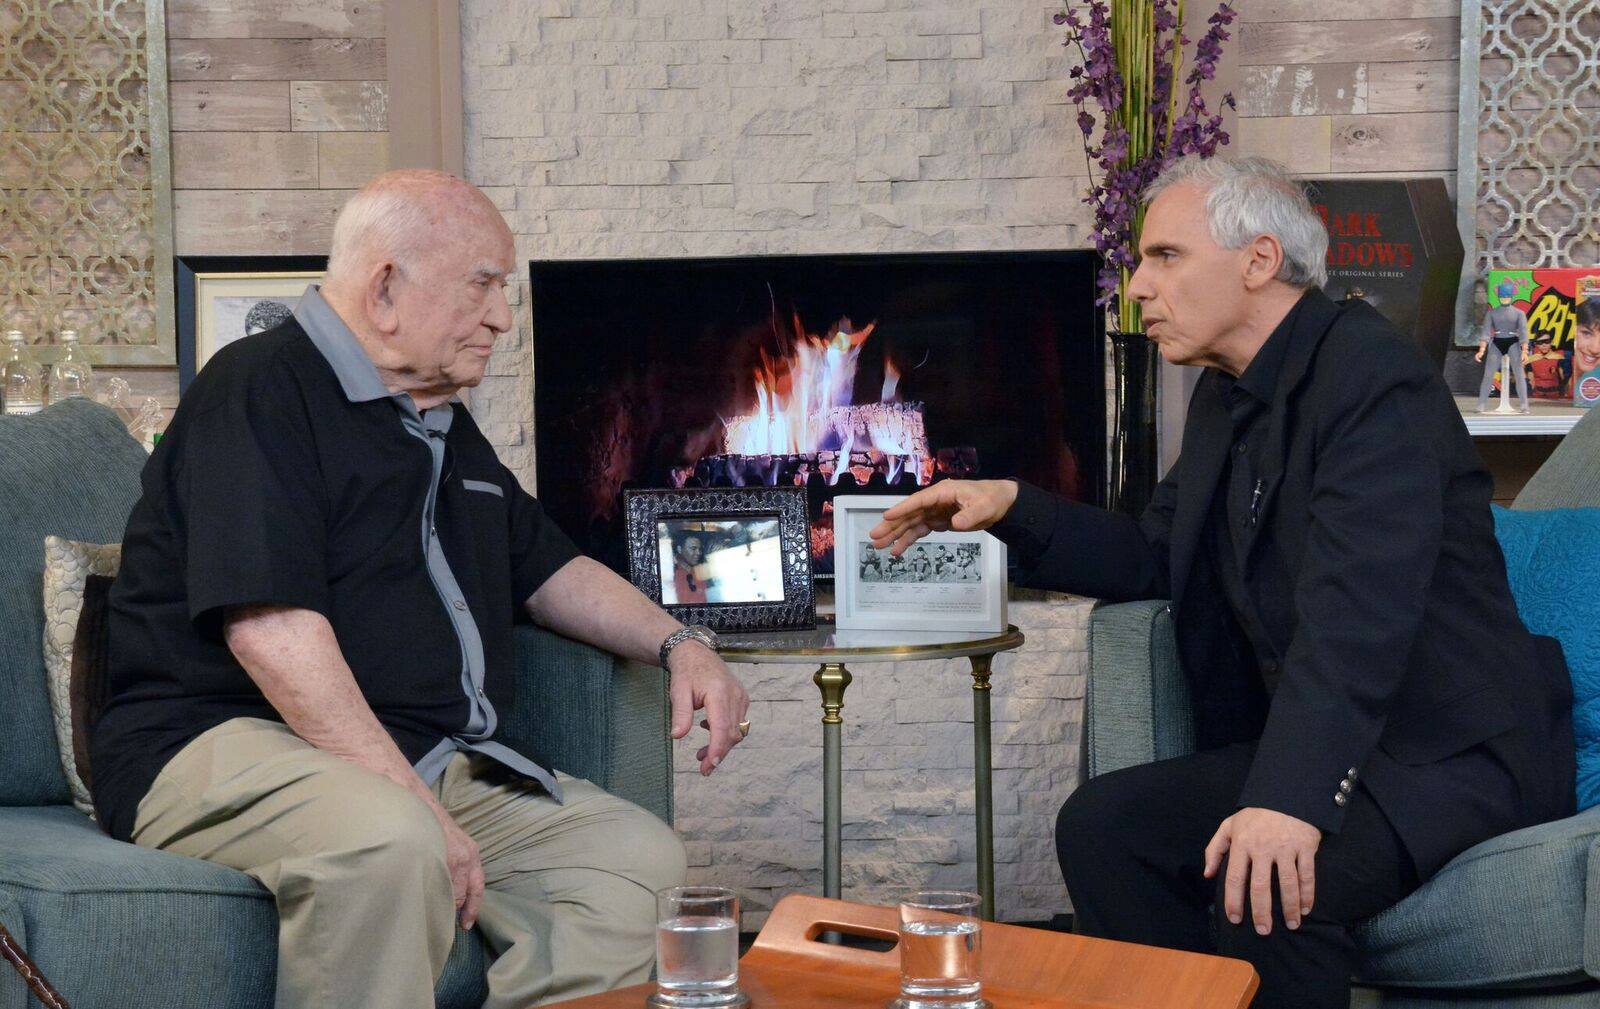 Then Again with Herbie J Pilato star Herbie J Pilato with Ed Asner. (Dan Holm Photography)